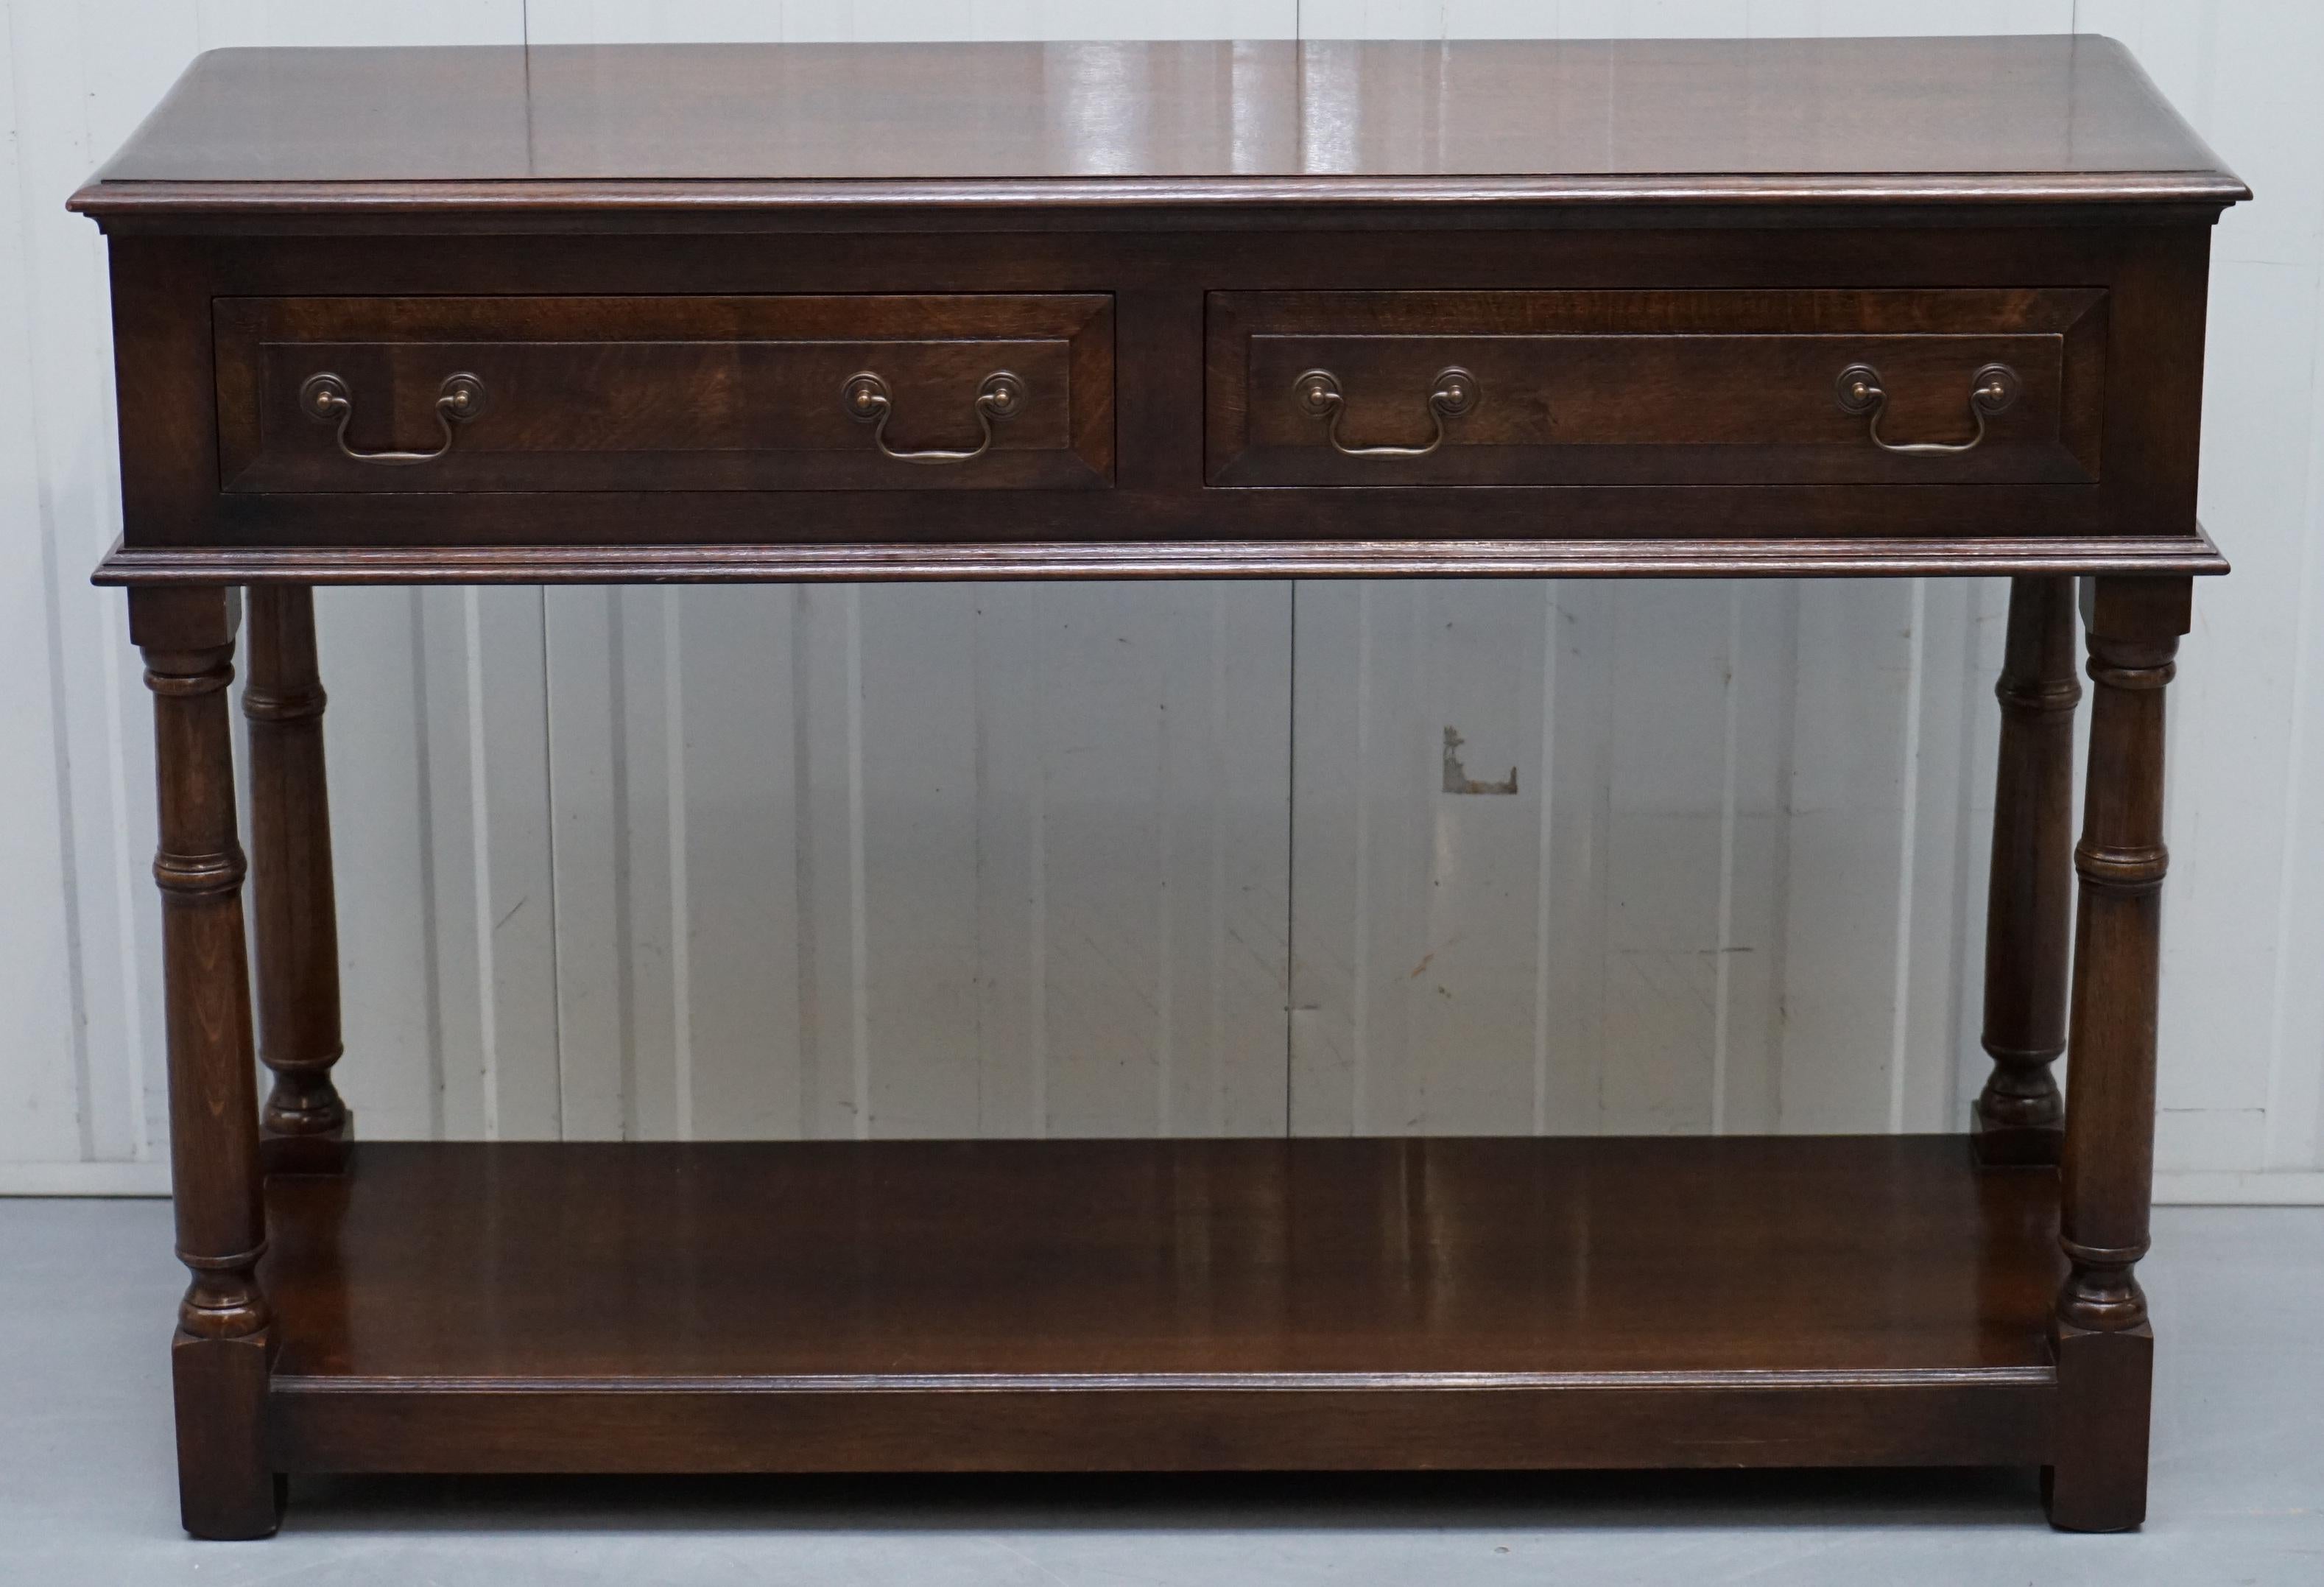 We delighted to offer for sale this very nice handmade in England solid oak sideboard with drawers

This piece has some light marks here and there based on honest age and fair use. We have deep cleaned hand condition waxed and hand polished it